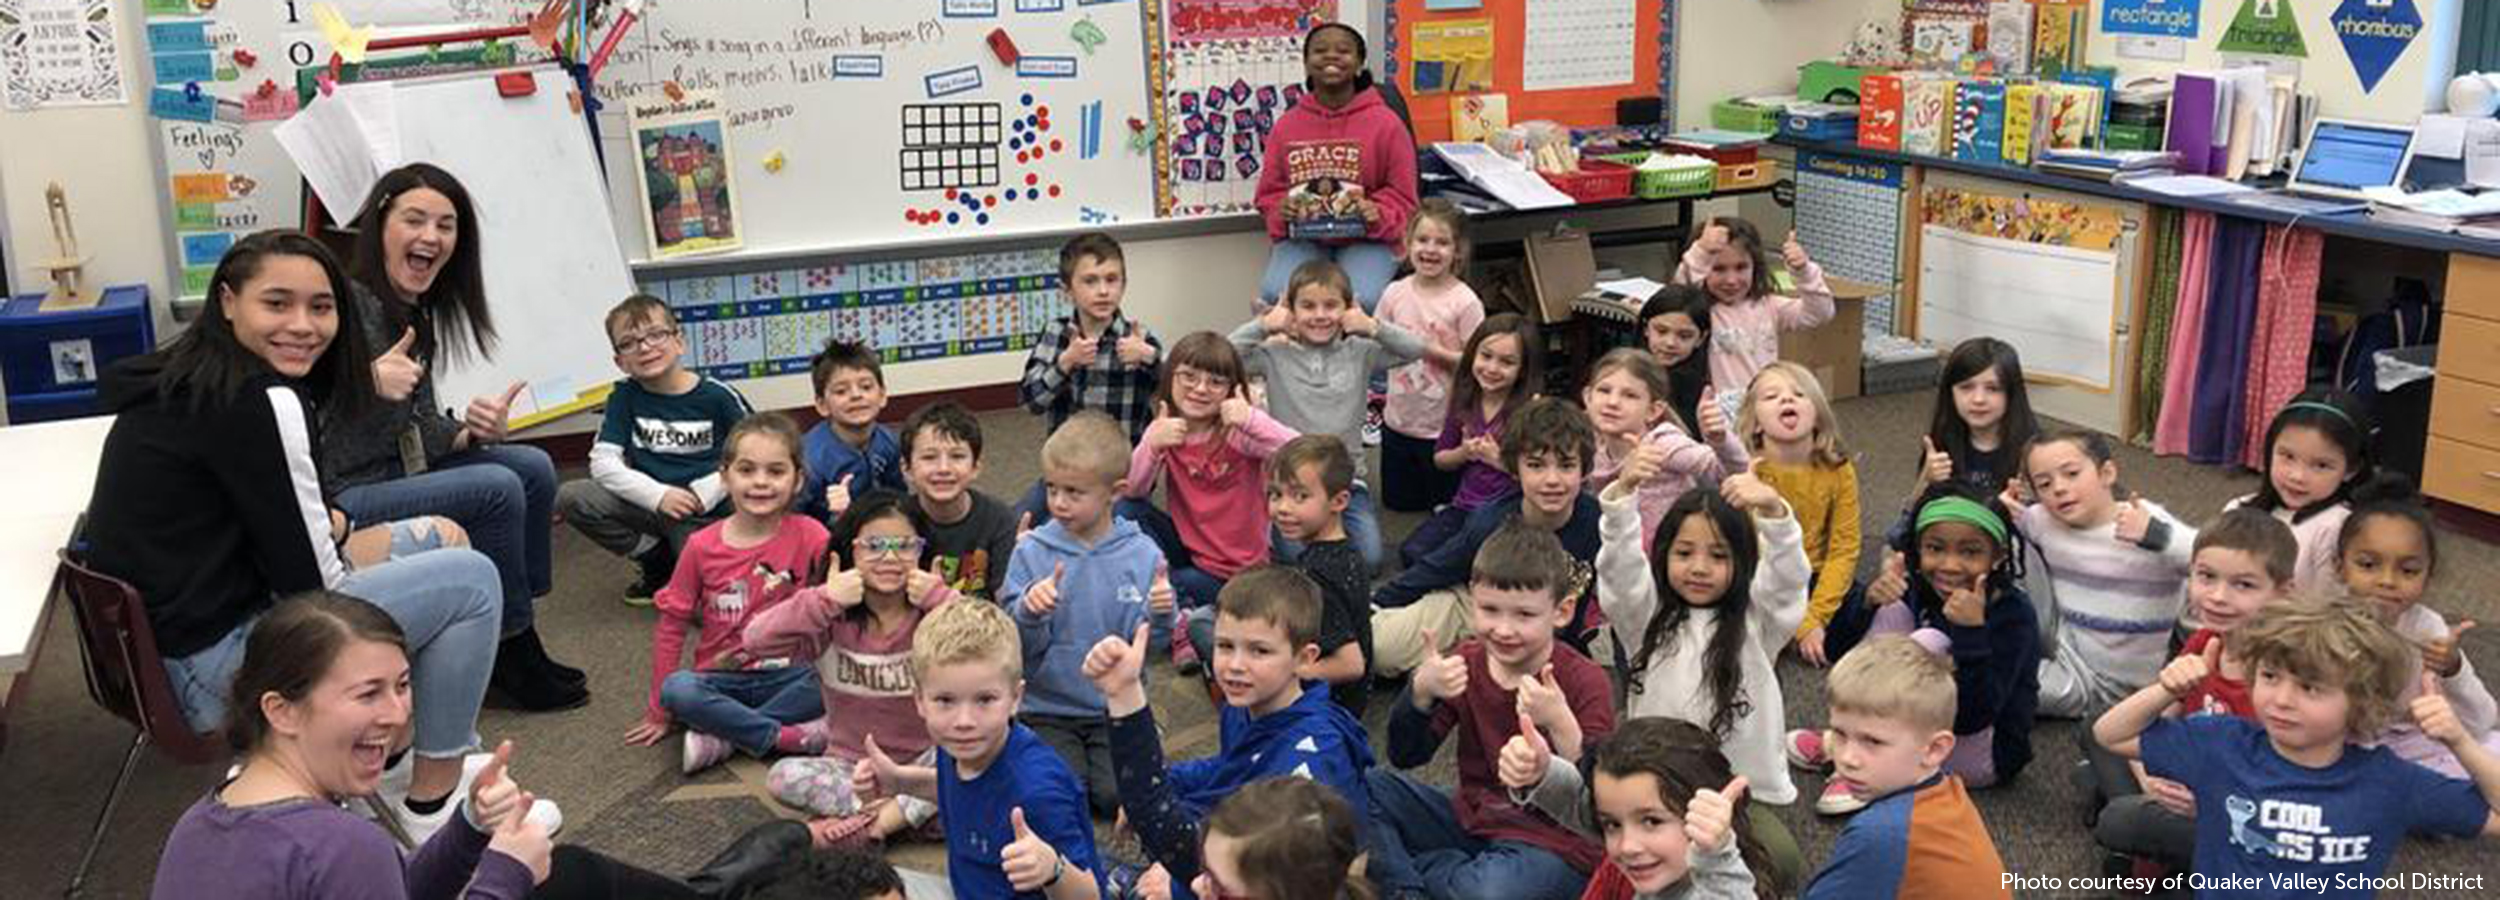 Photo from a Quaker Valley School District kindergarten classroom with students sitting on the floor all giving a thumbs up to the camera